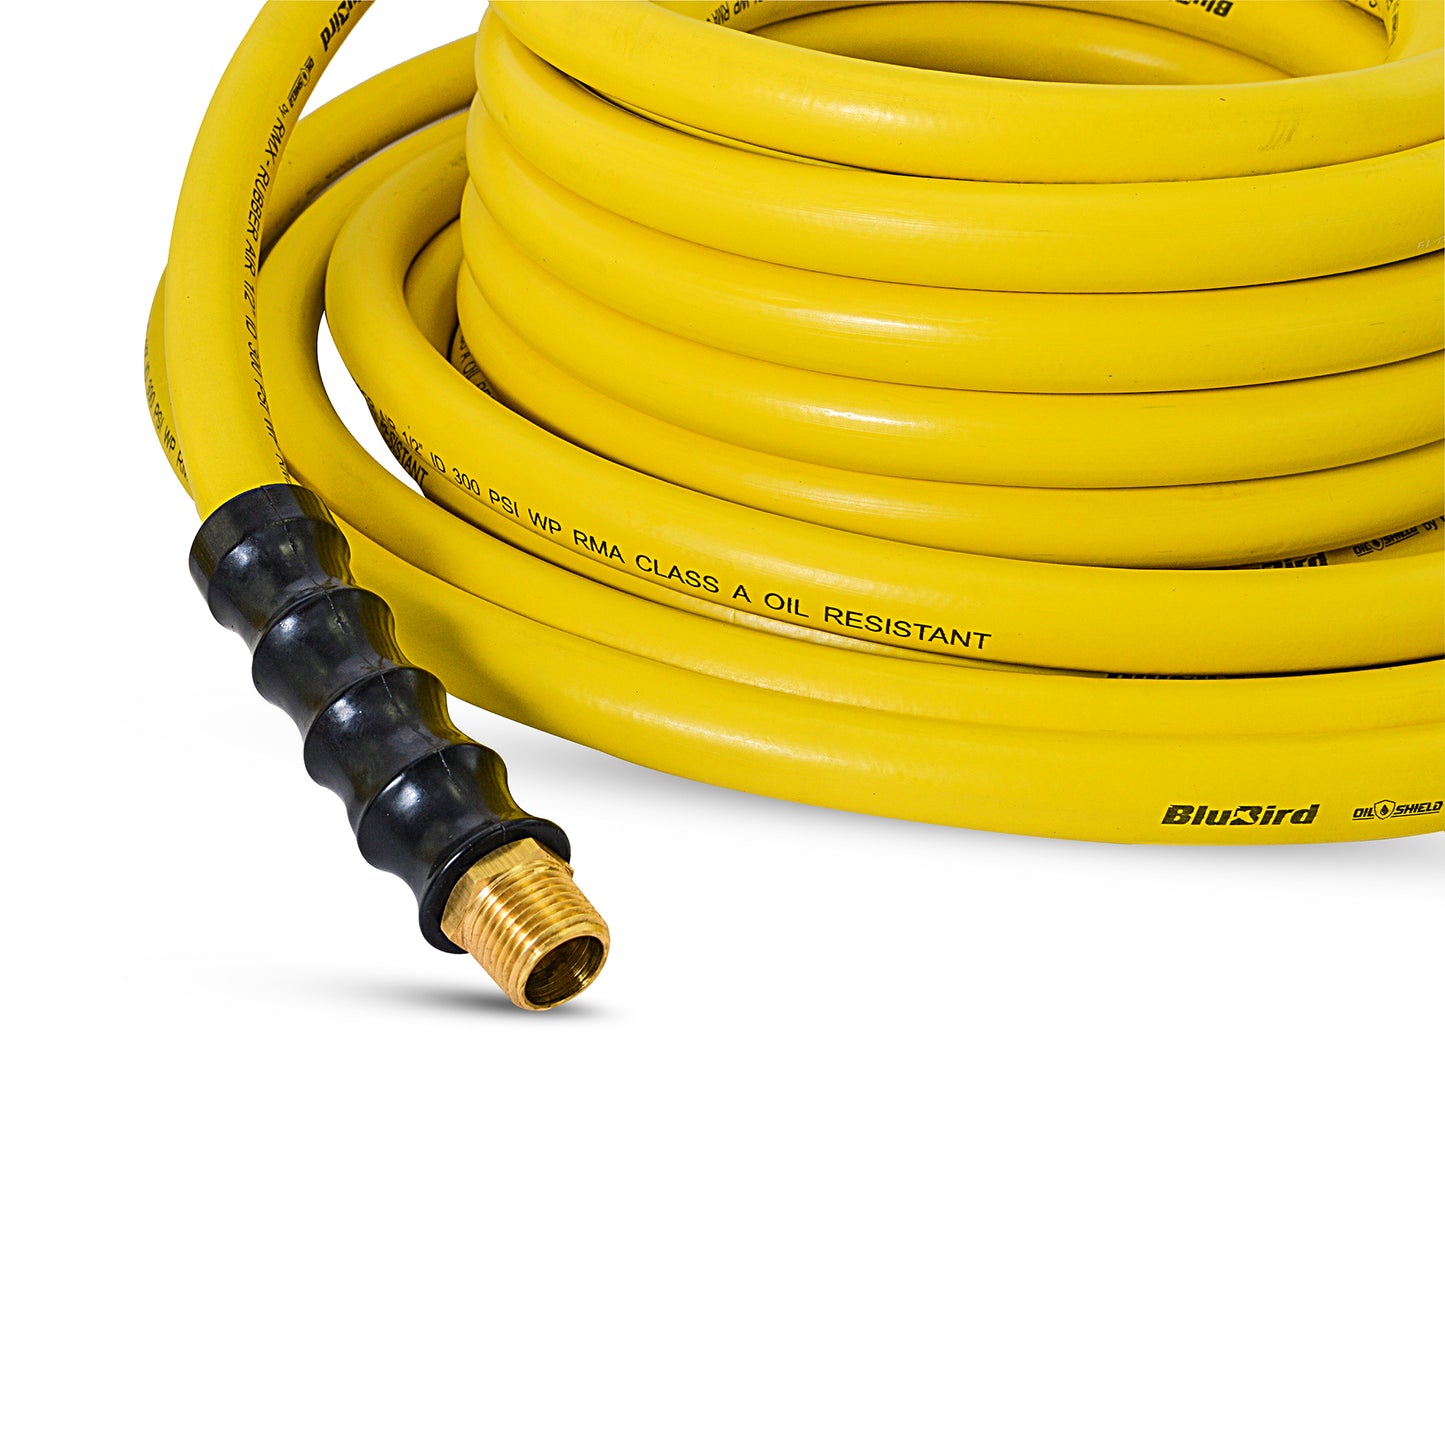 OilShield Rubber Air Hose 8mm X 20M with Coupler & Snap on Plug